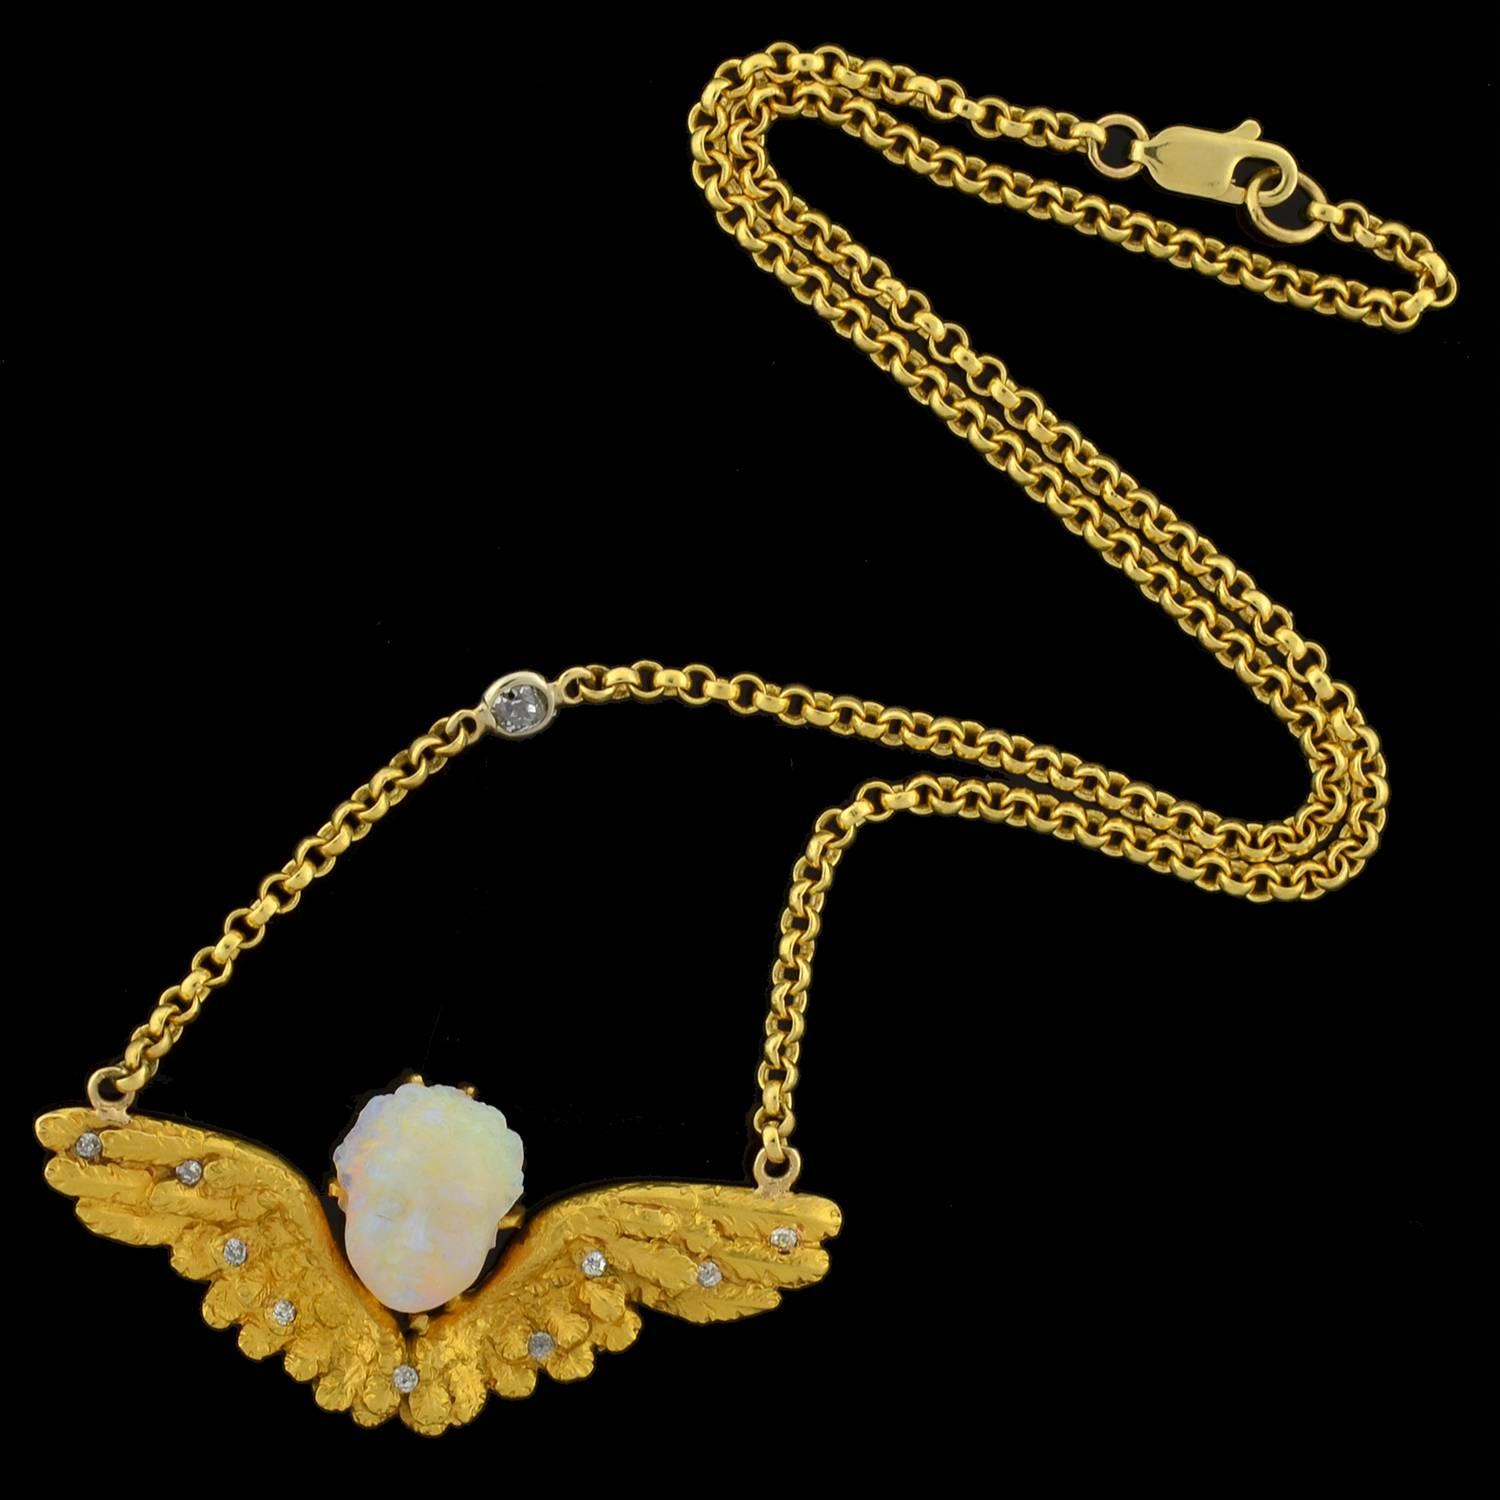 An exquisite handmade necklace from the Victorian (ca1880) era! This stunning piece was originally an antique pin, and is now a beautiful and stylish conversion piece. The necklace is made of 18kt yellow gold, and features a lovely cherub pendant